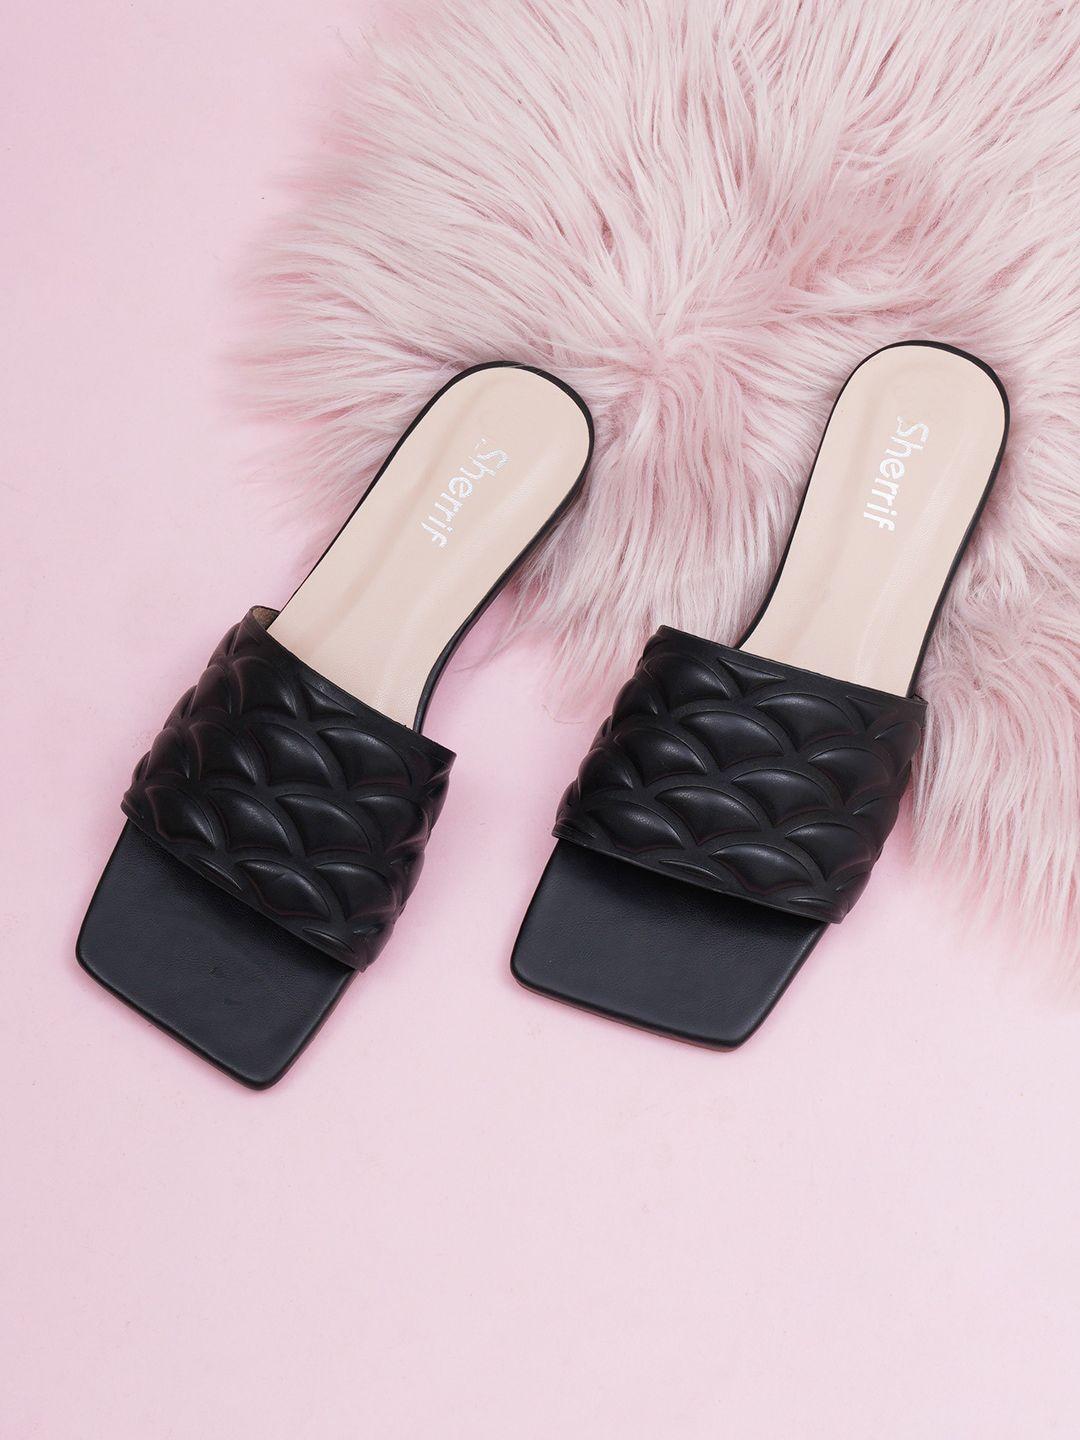 sherrif shoes women black striped mules with bows flats